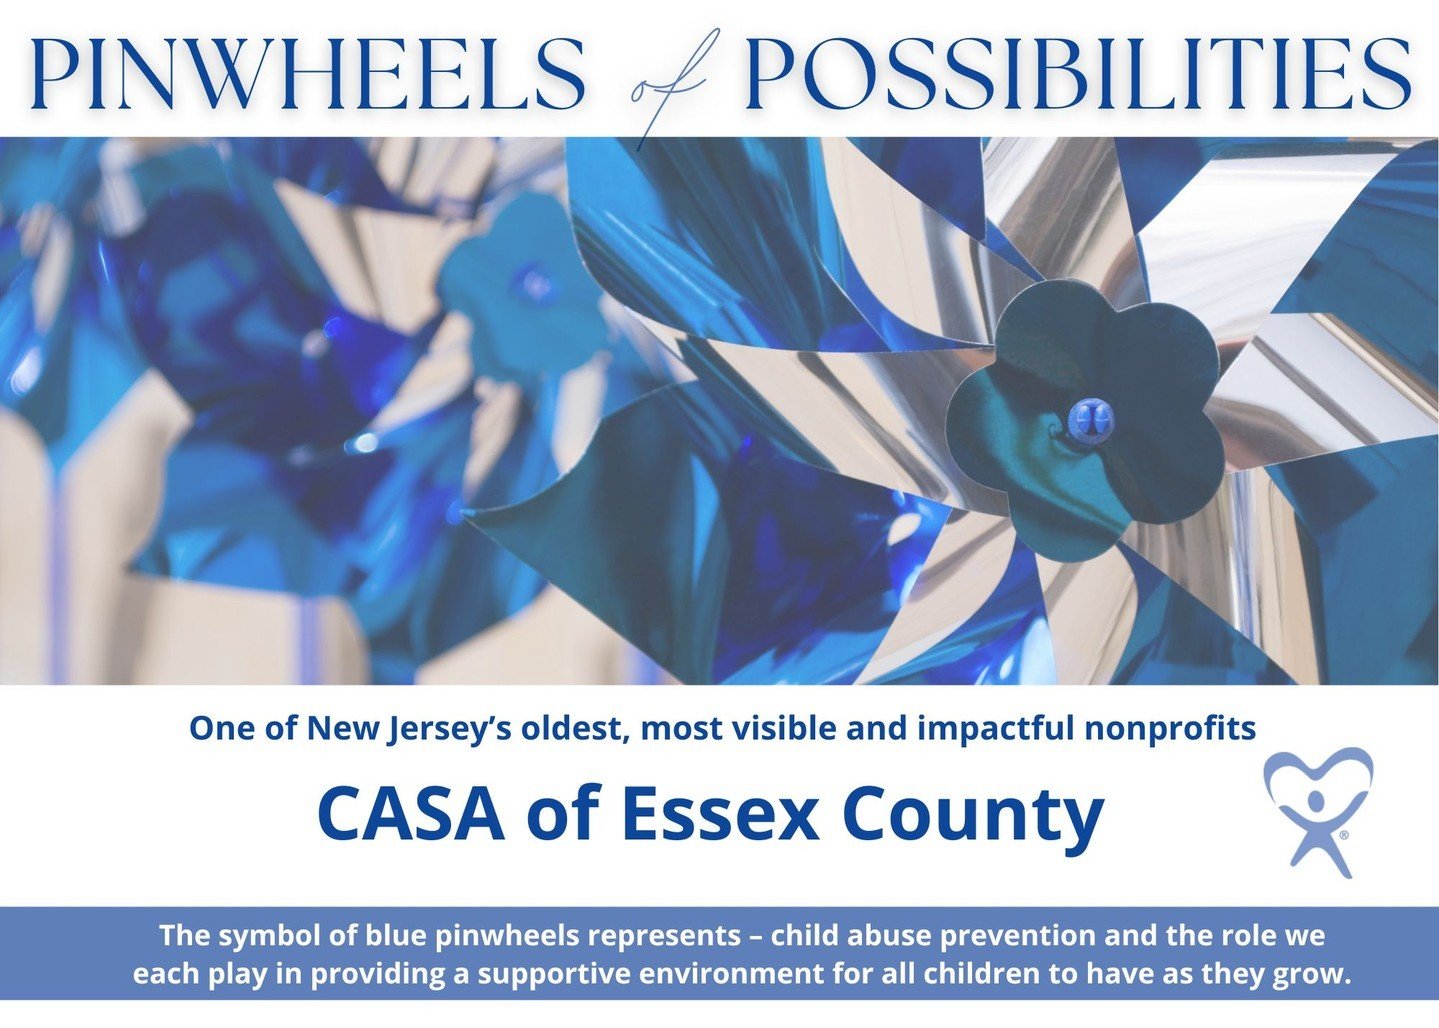 April is Child Abuse Prevention Month, and CASA Essex wants to bring attention to everything we can do to provide safety and stability to the children in our communities. Visit our story to learn more about the role our volunteers play in providing a